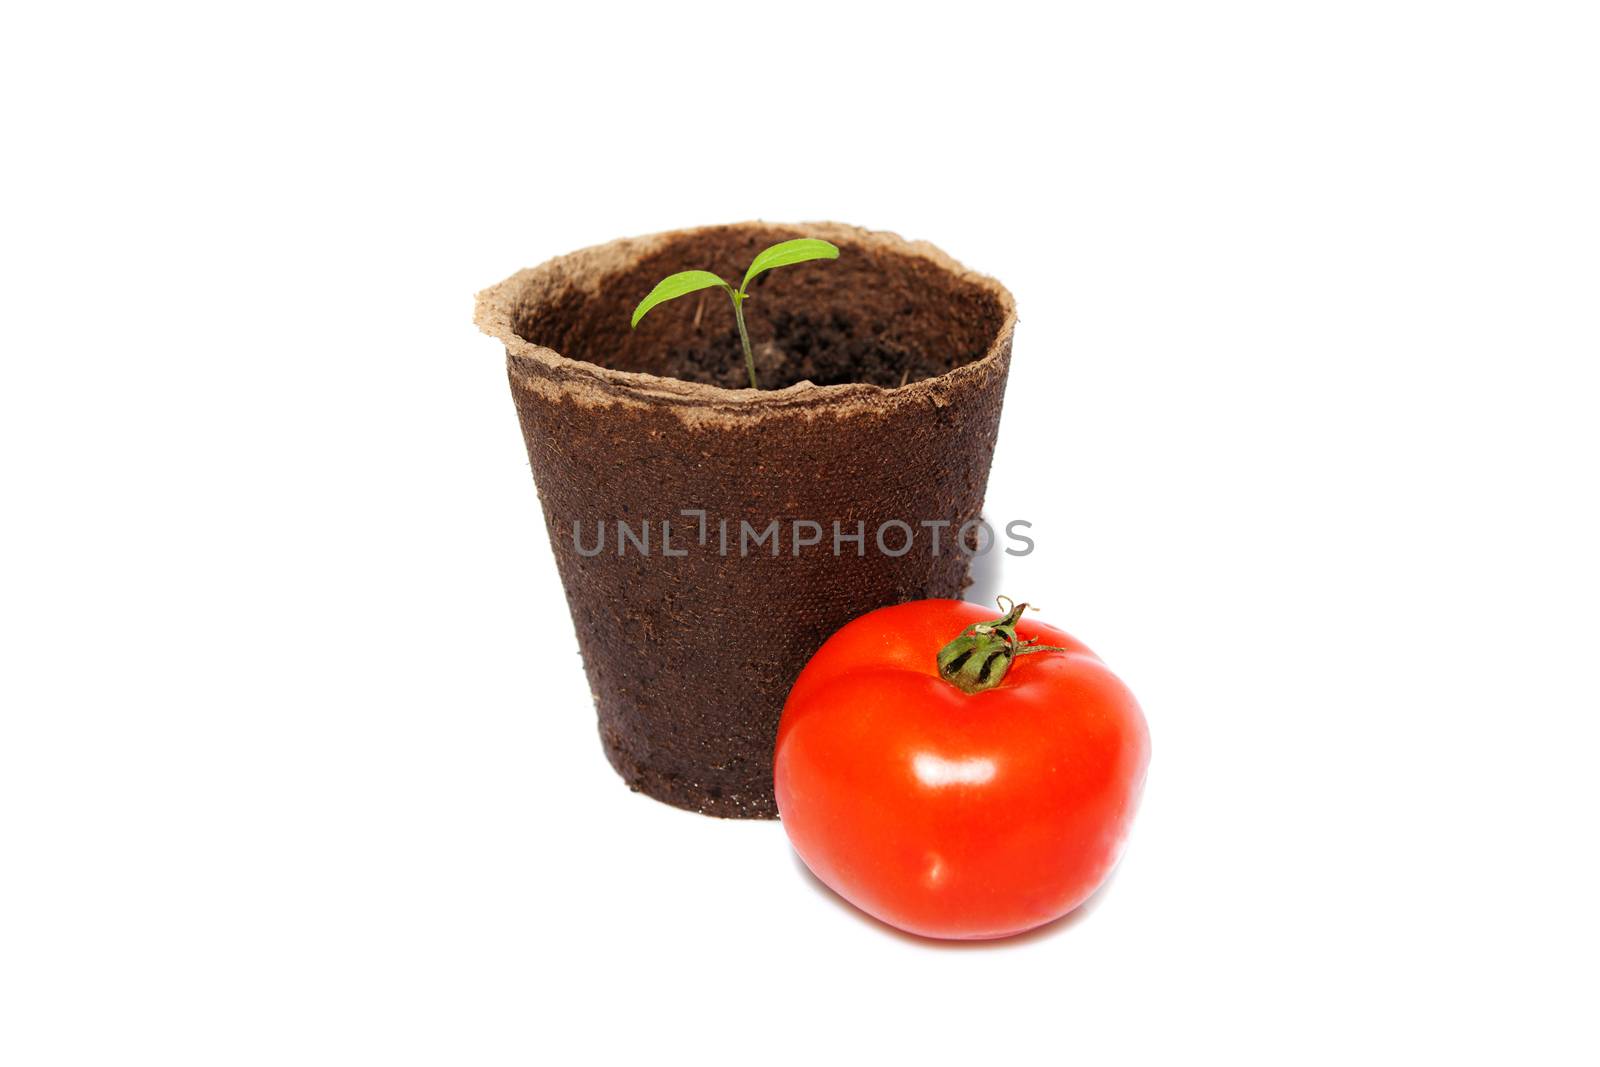 new sprout of tomato and the same vegetable by vsurkov